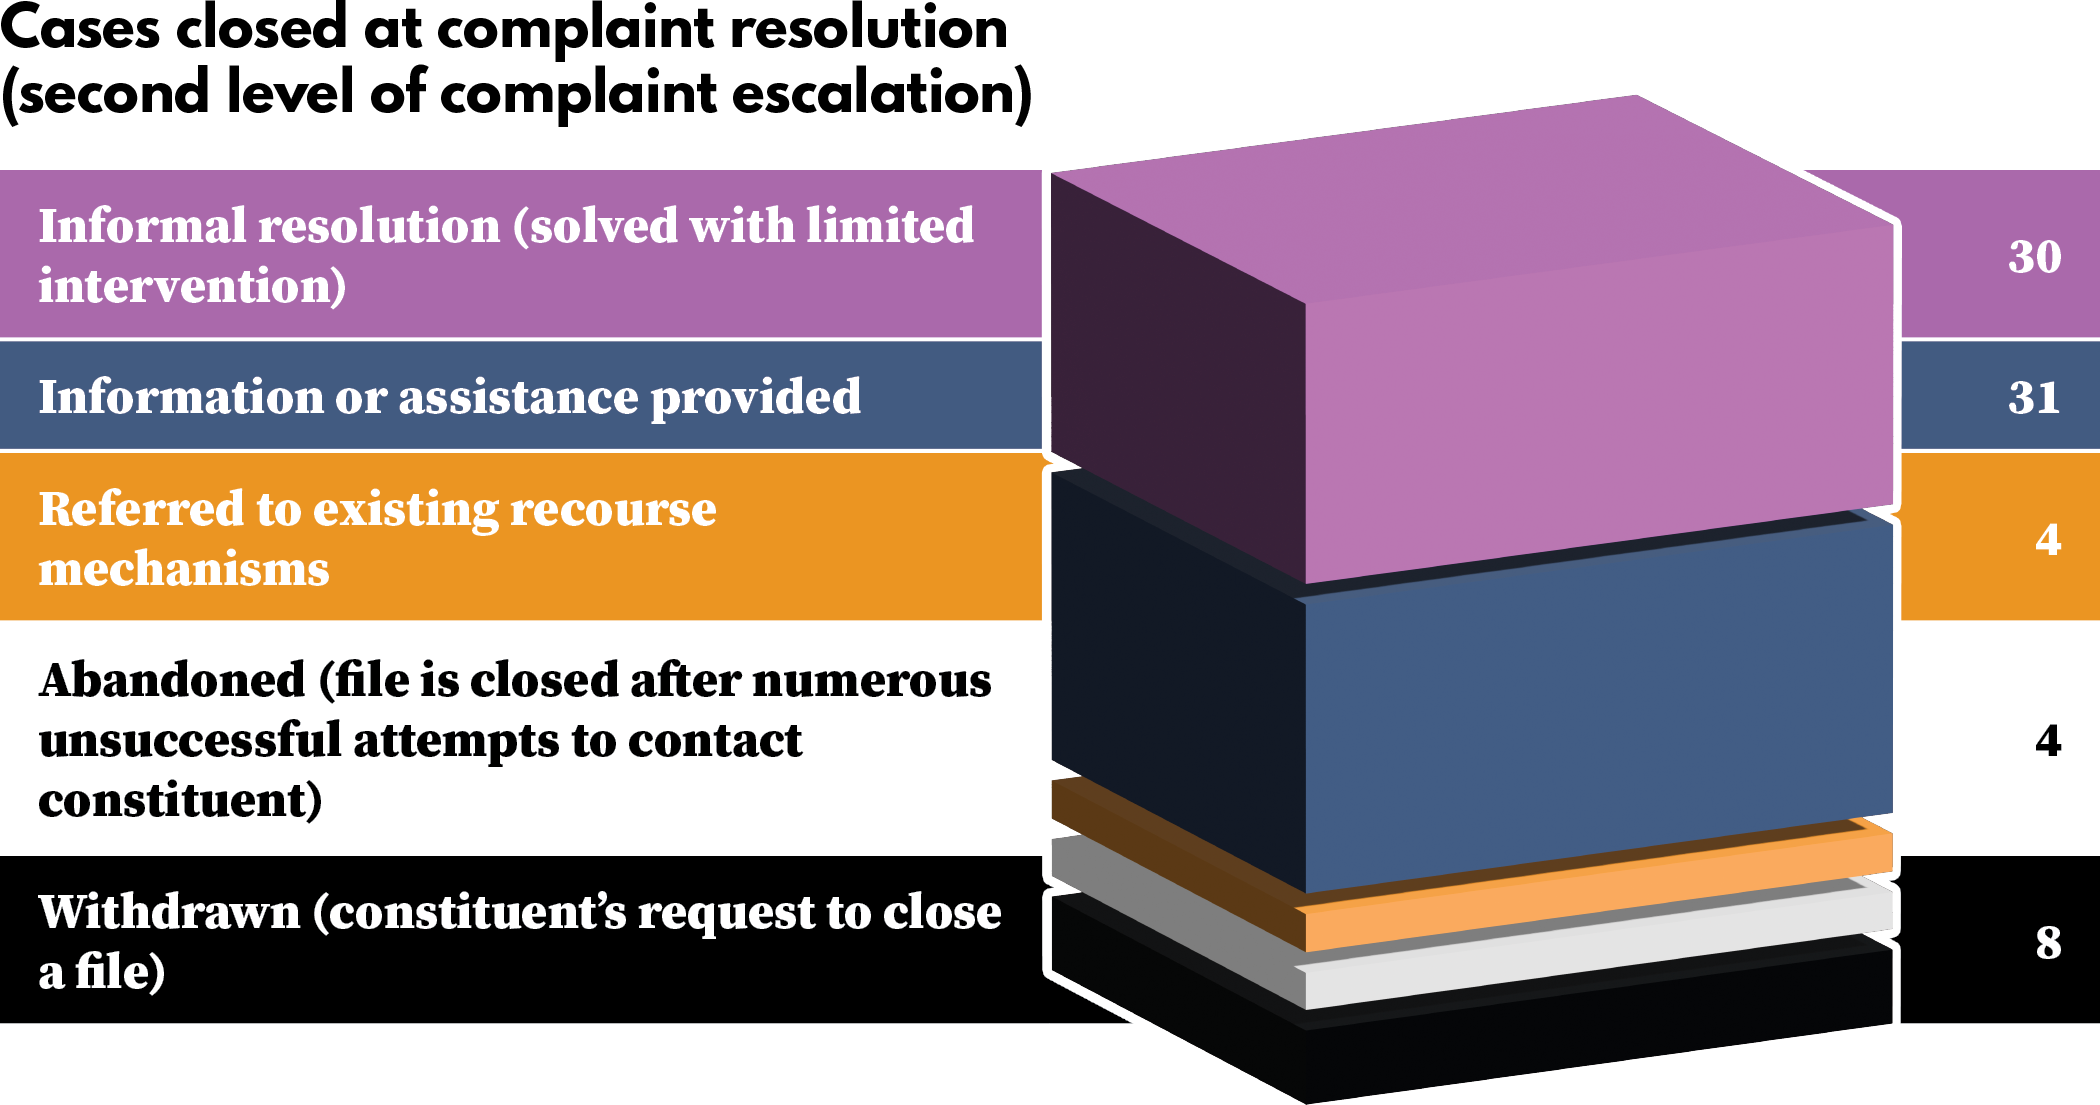 Cases closed at complaint resolution (second level of complaint escalation)